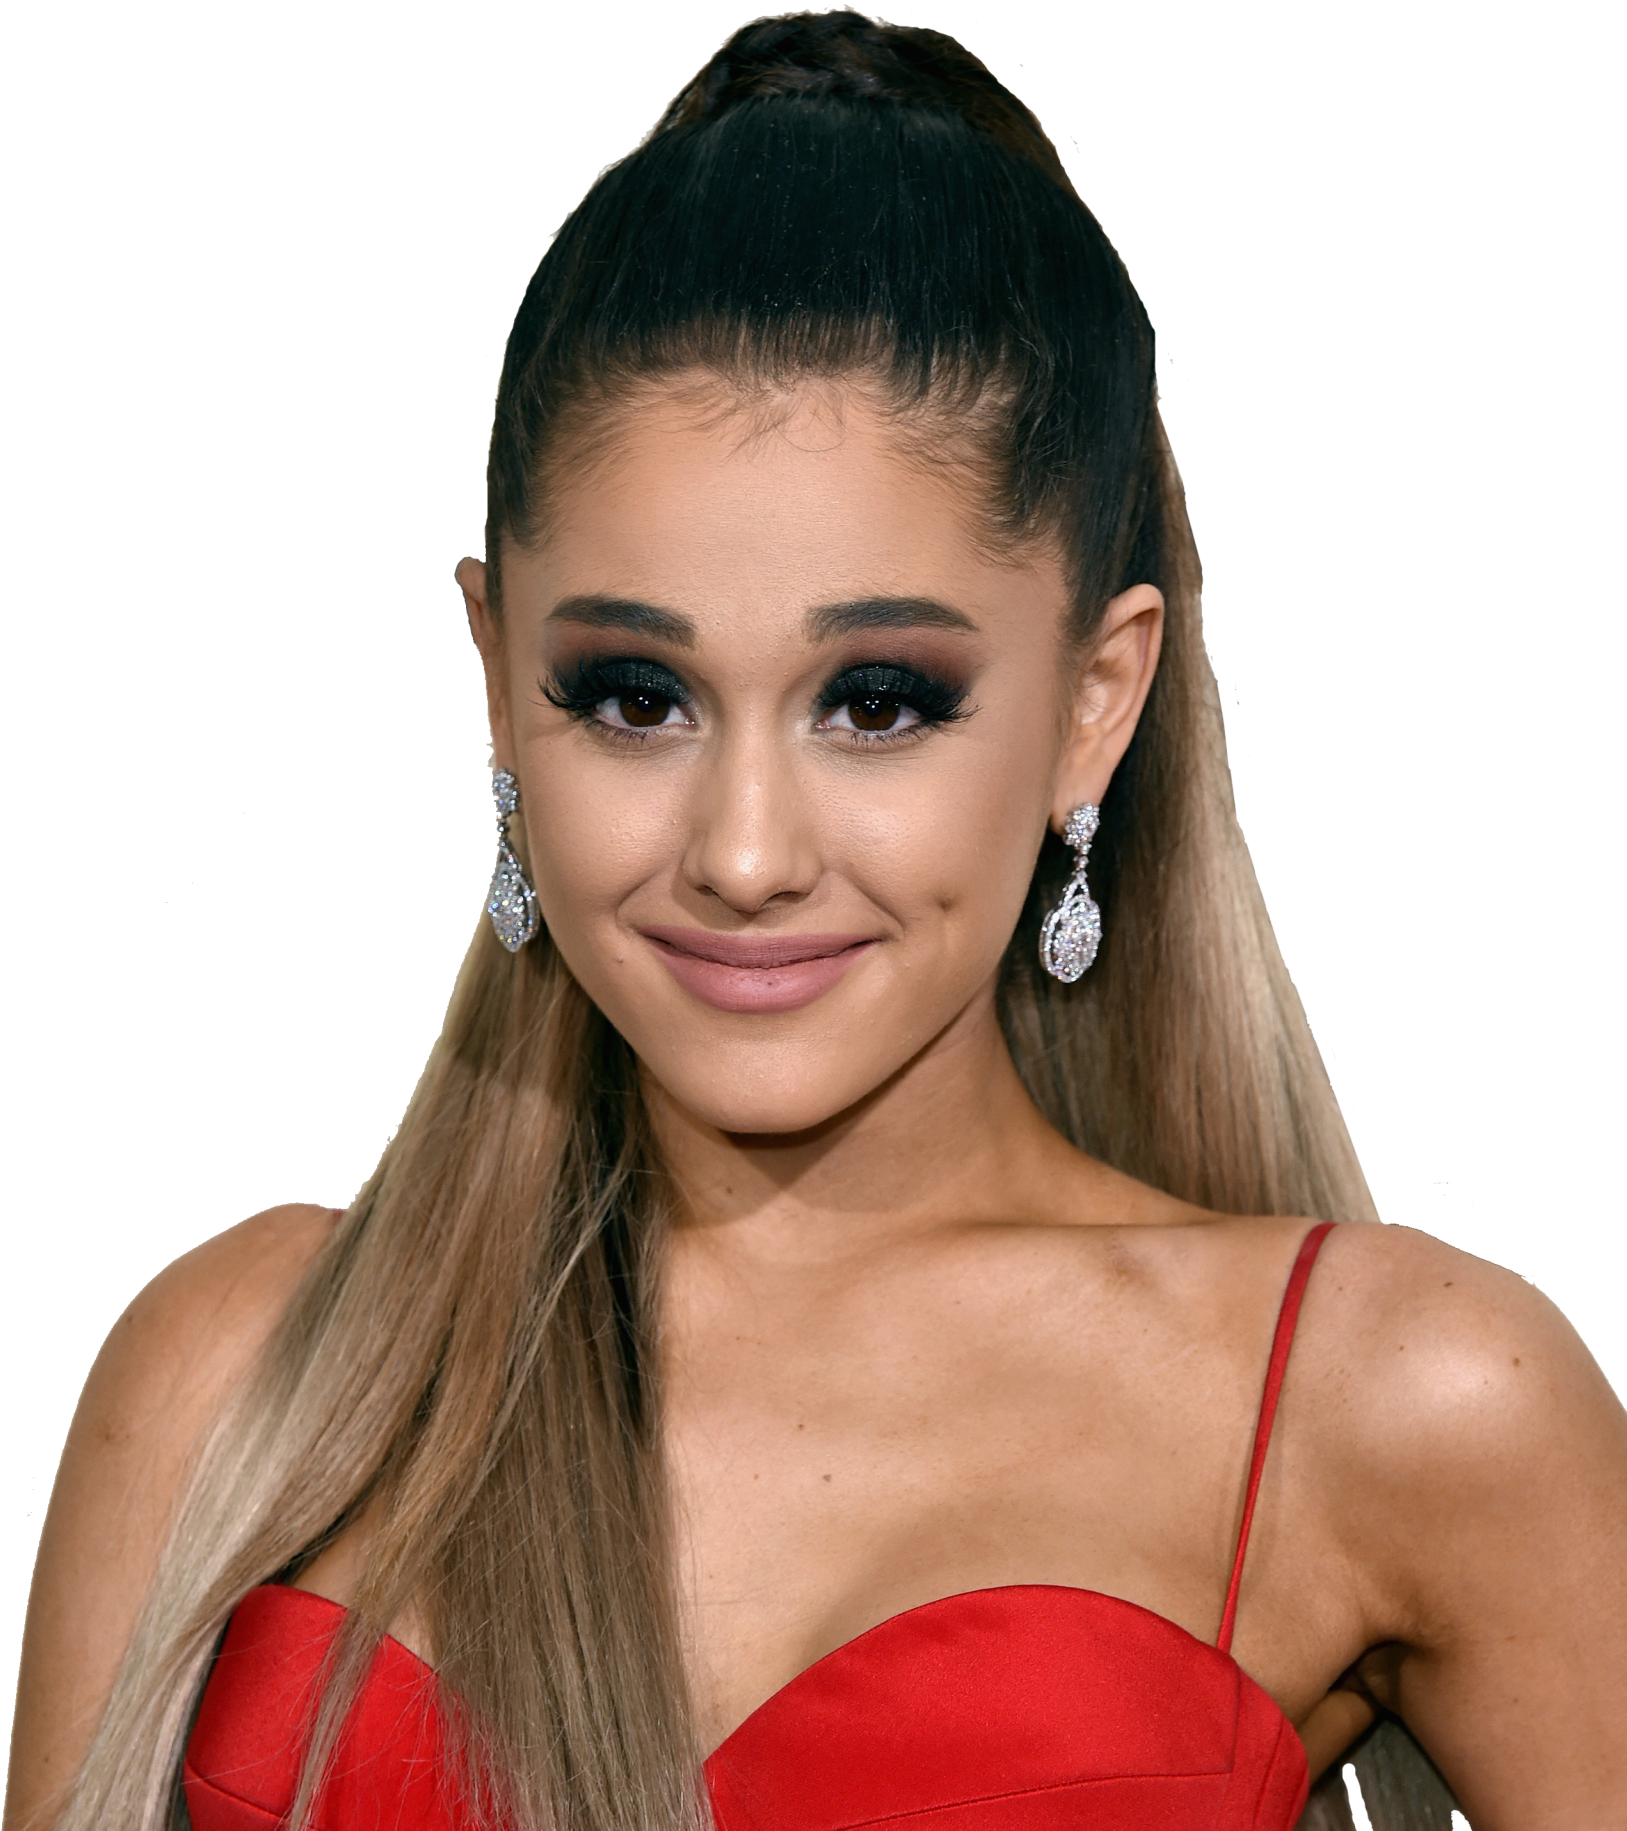 Download Clueless Brittany Murphy Ariana Grande Ariana Grande Makeup Looks Png Image With No Background Pngkey Com